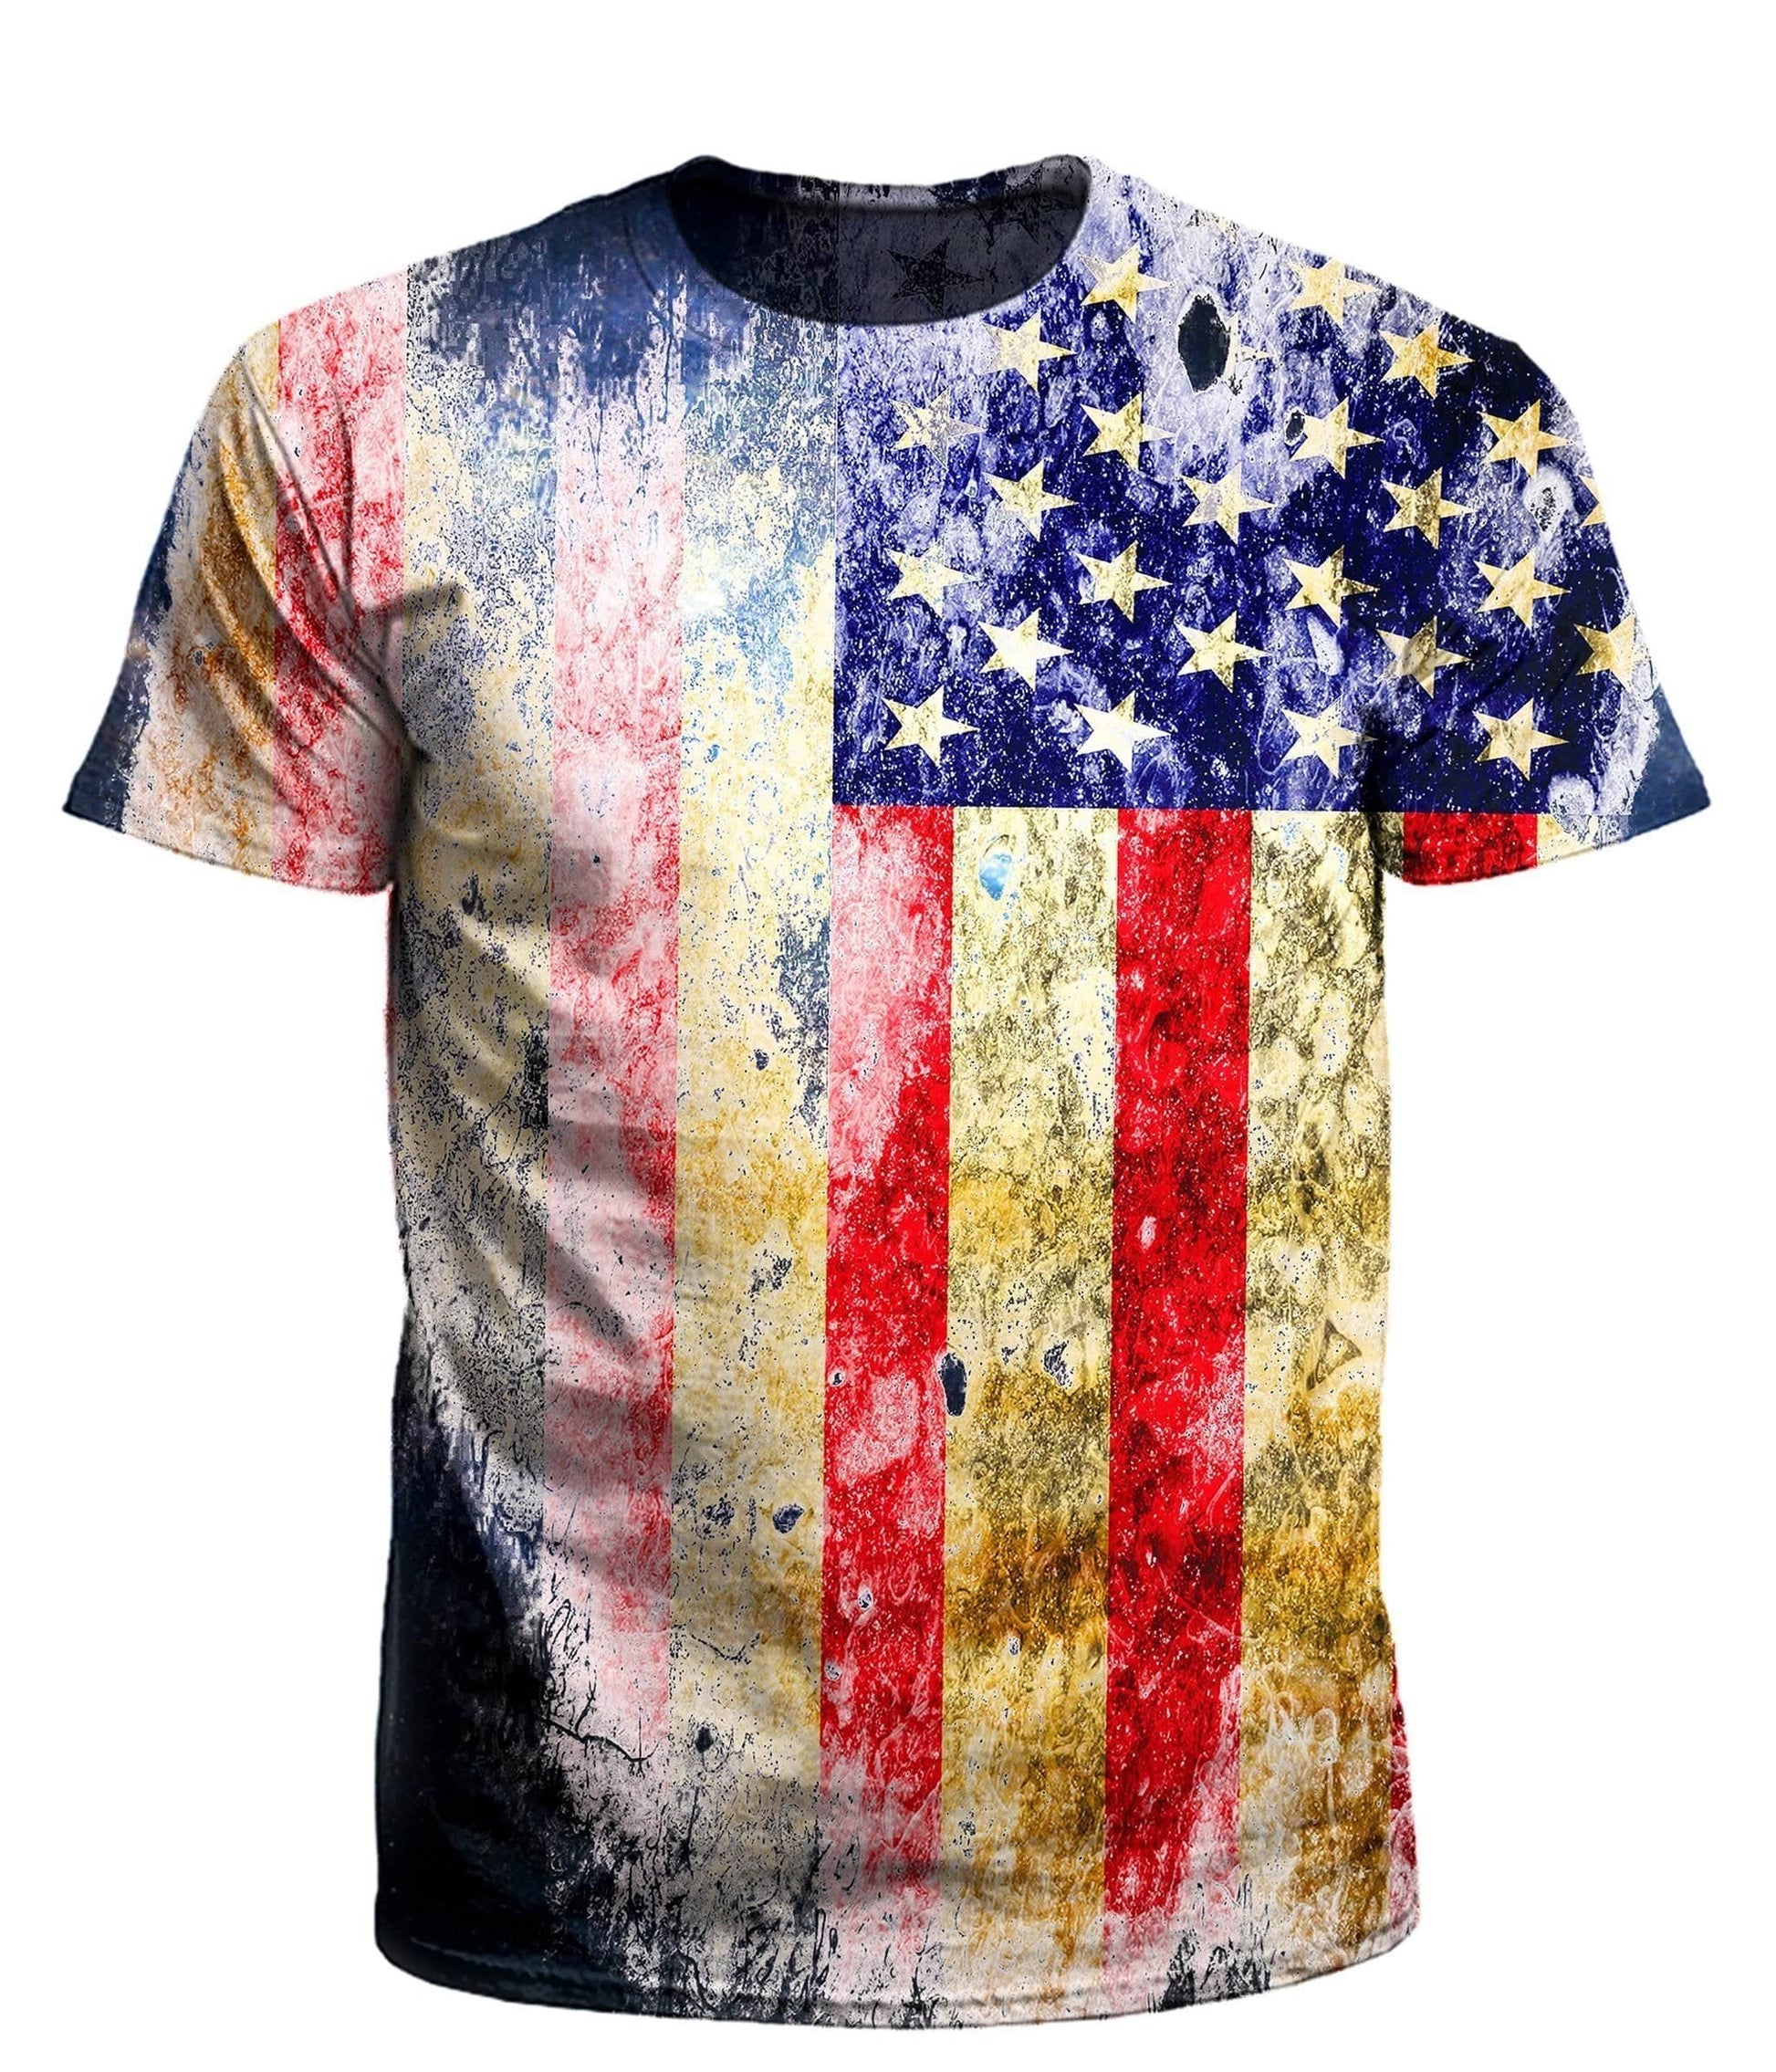 Tattered Flag T-Shirt and Shorts Combo, Gratefully Dyed, | iEDM